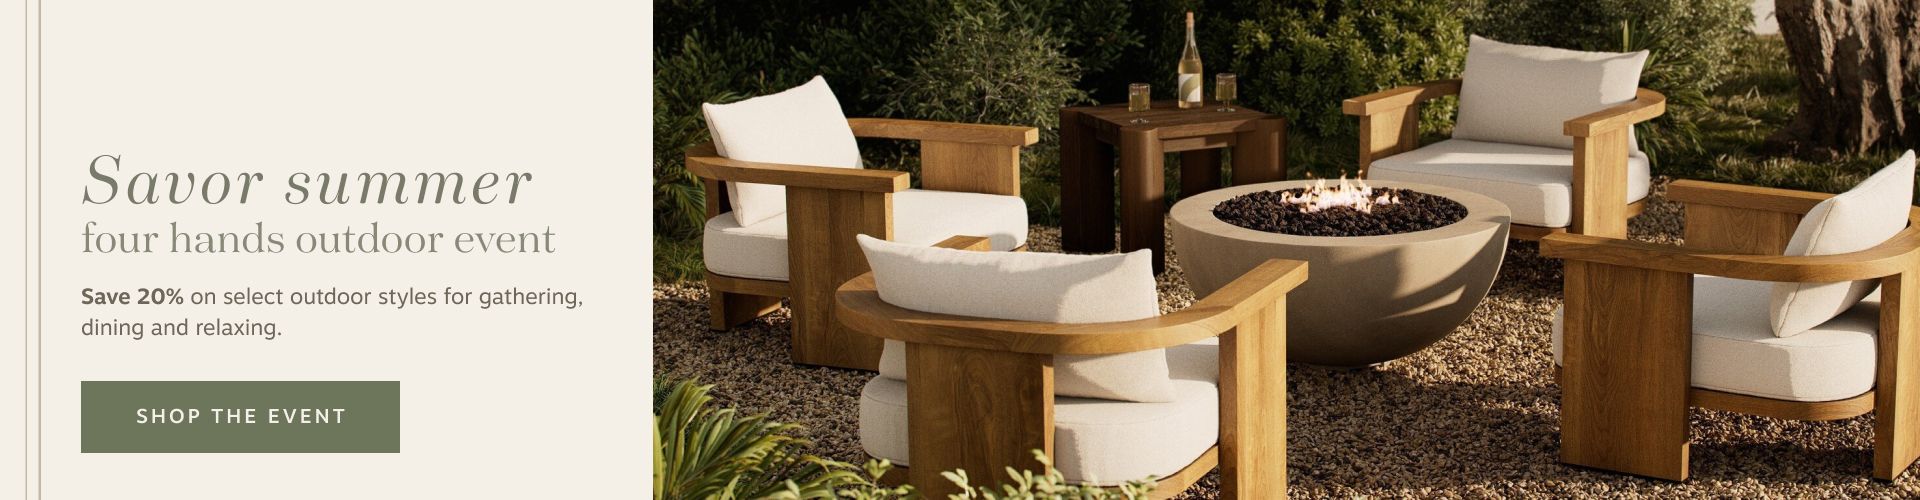 Savor Summer Four Hands Outdoor Event | Enjoy 20% savings on select outdoor styles for gathering, dining and relaxing. | Shop the Event